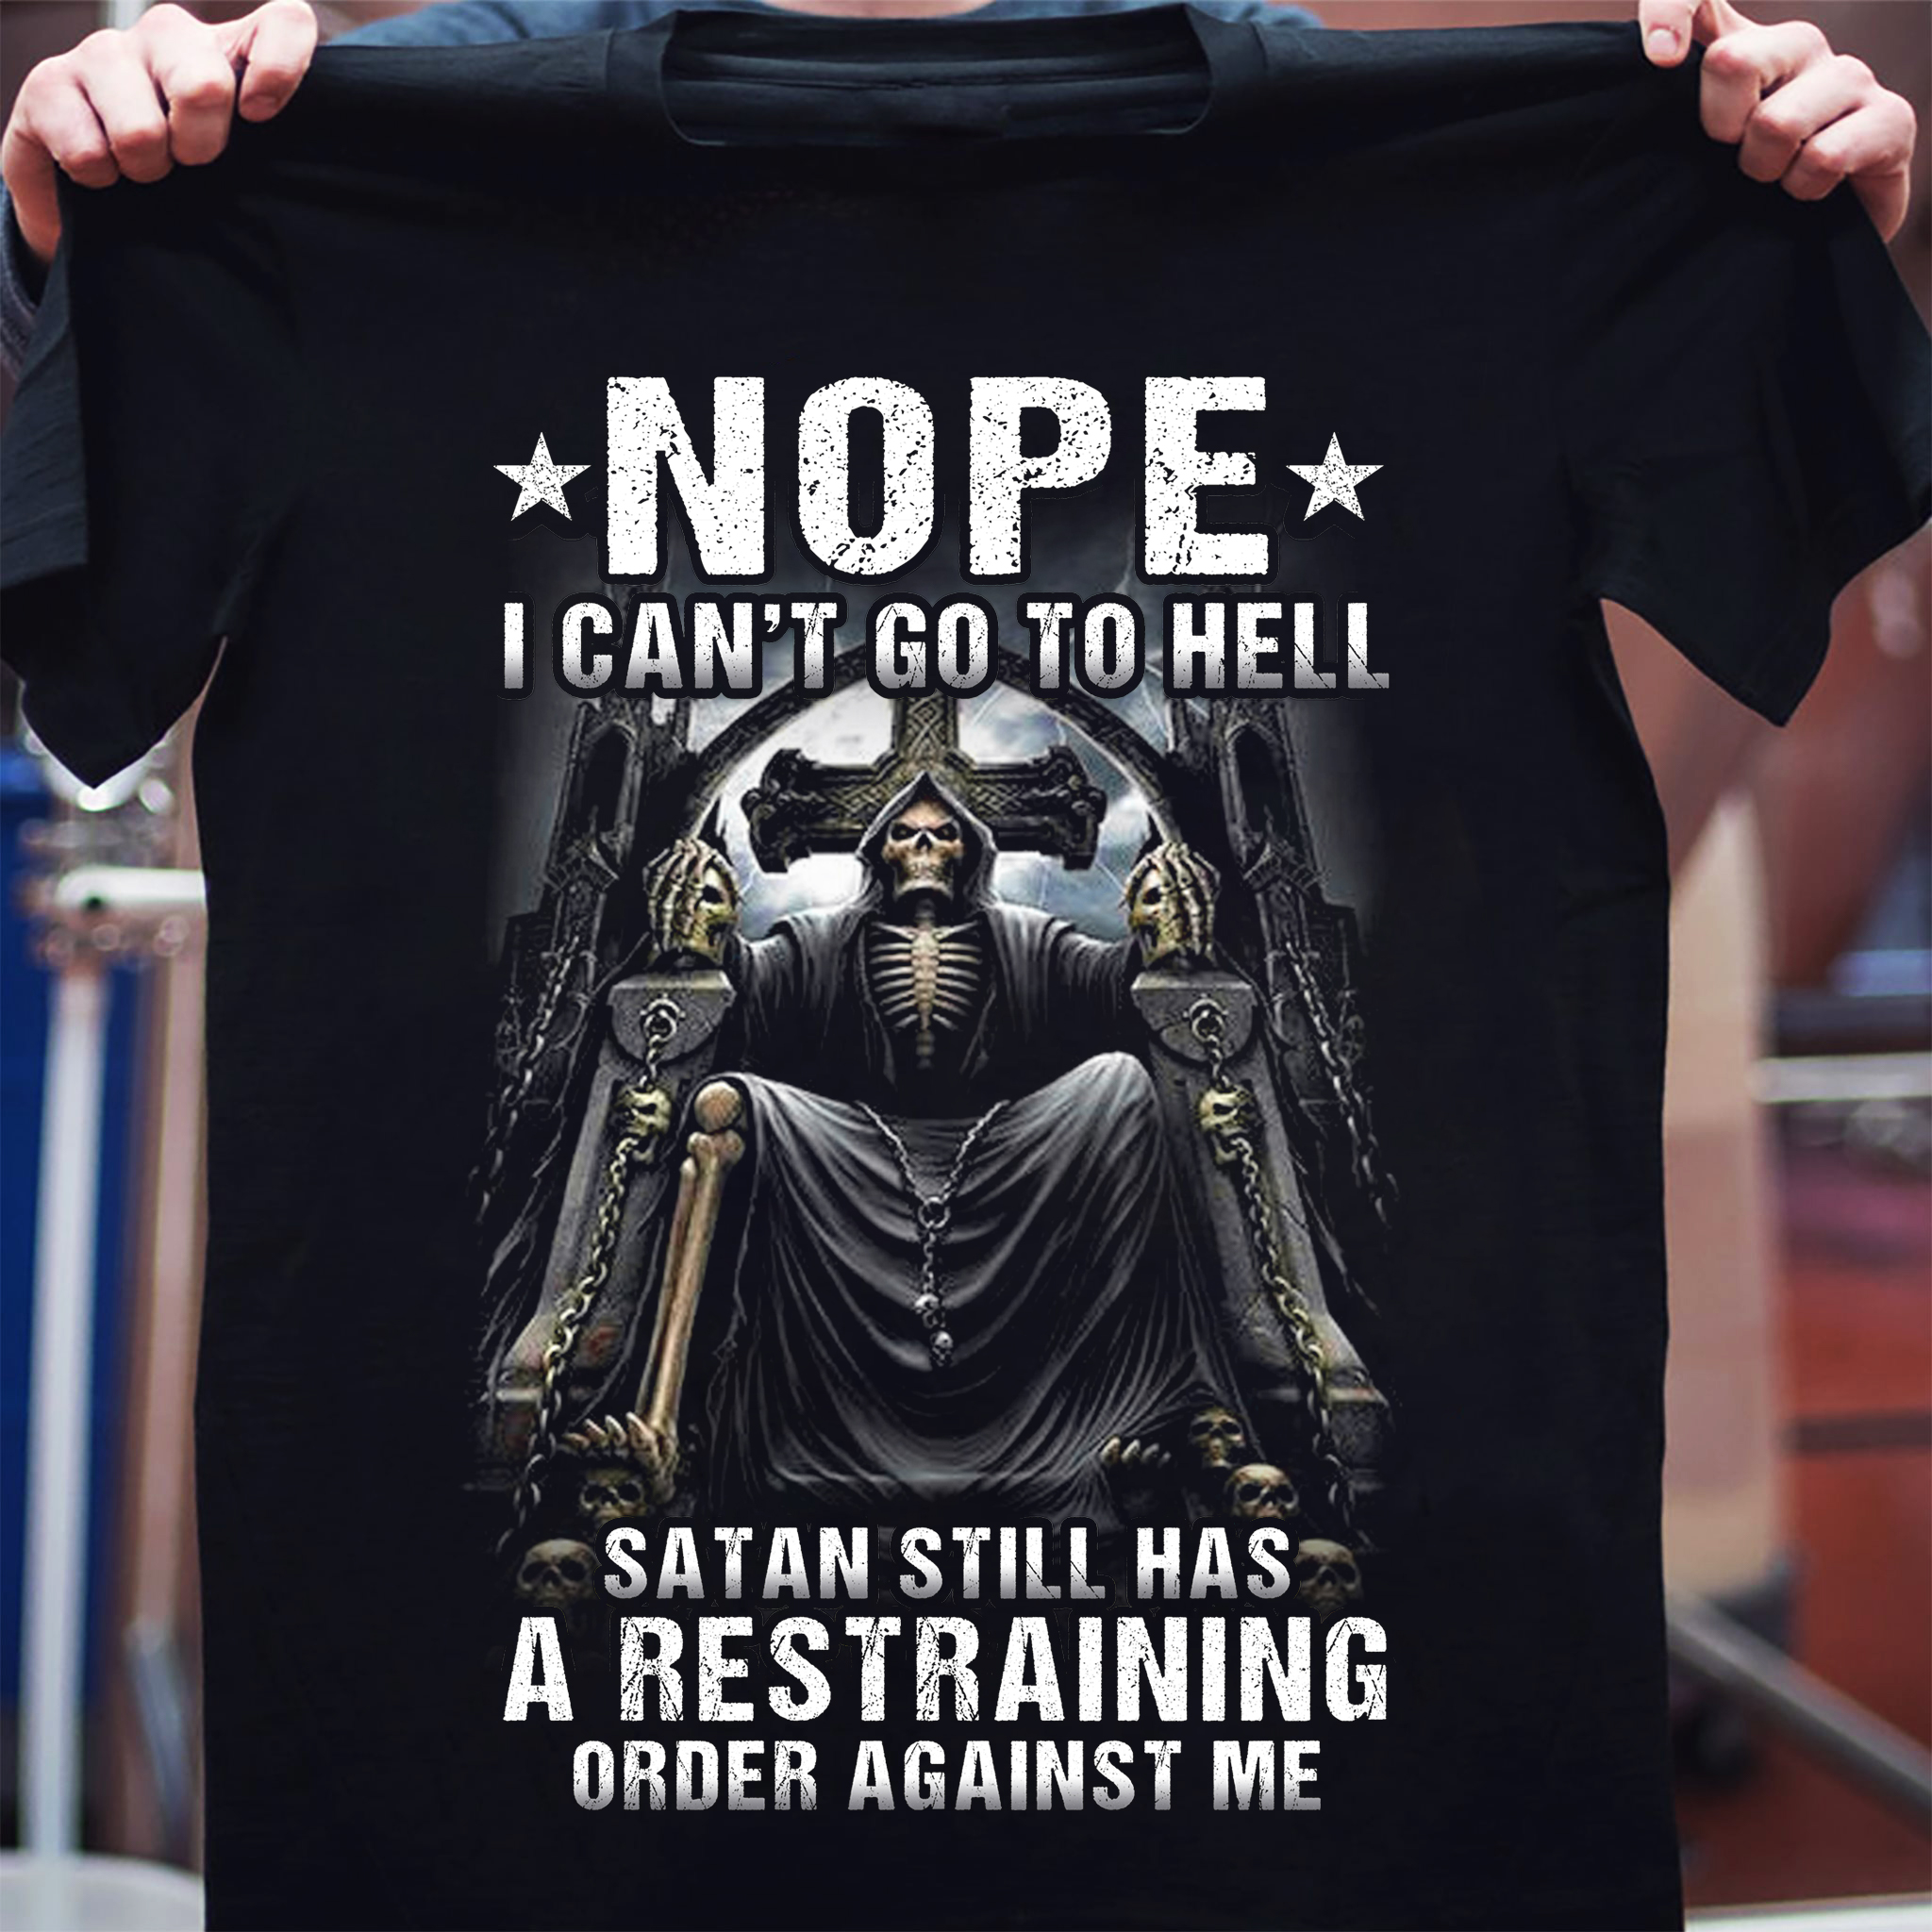 Nope I can't go to hell satan still has a restraining order against me - Black evil